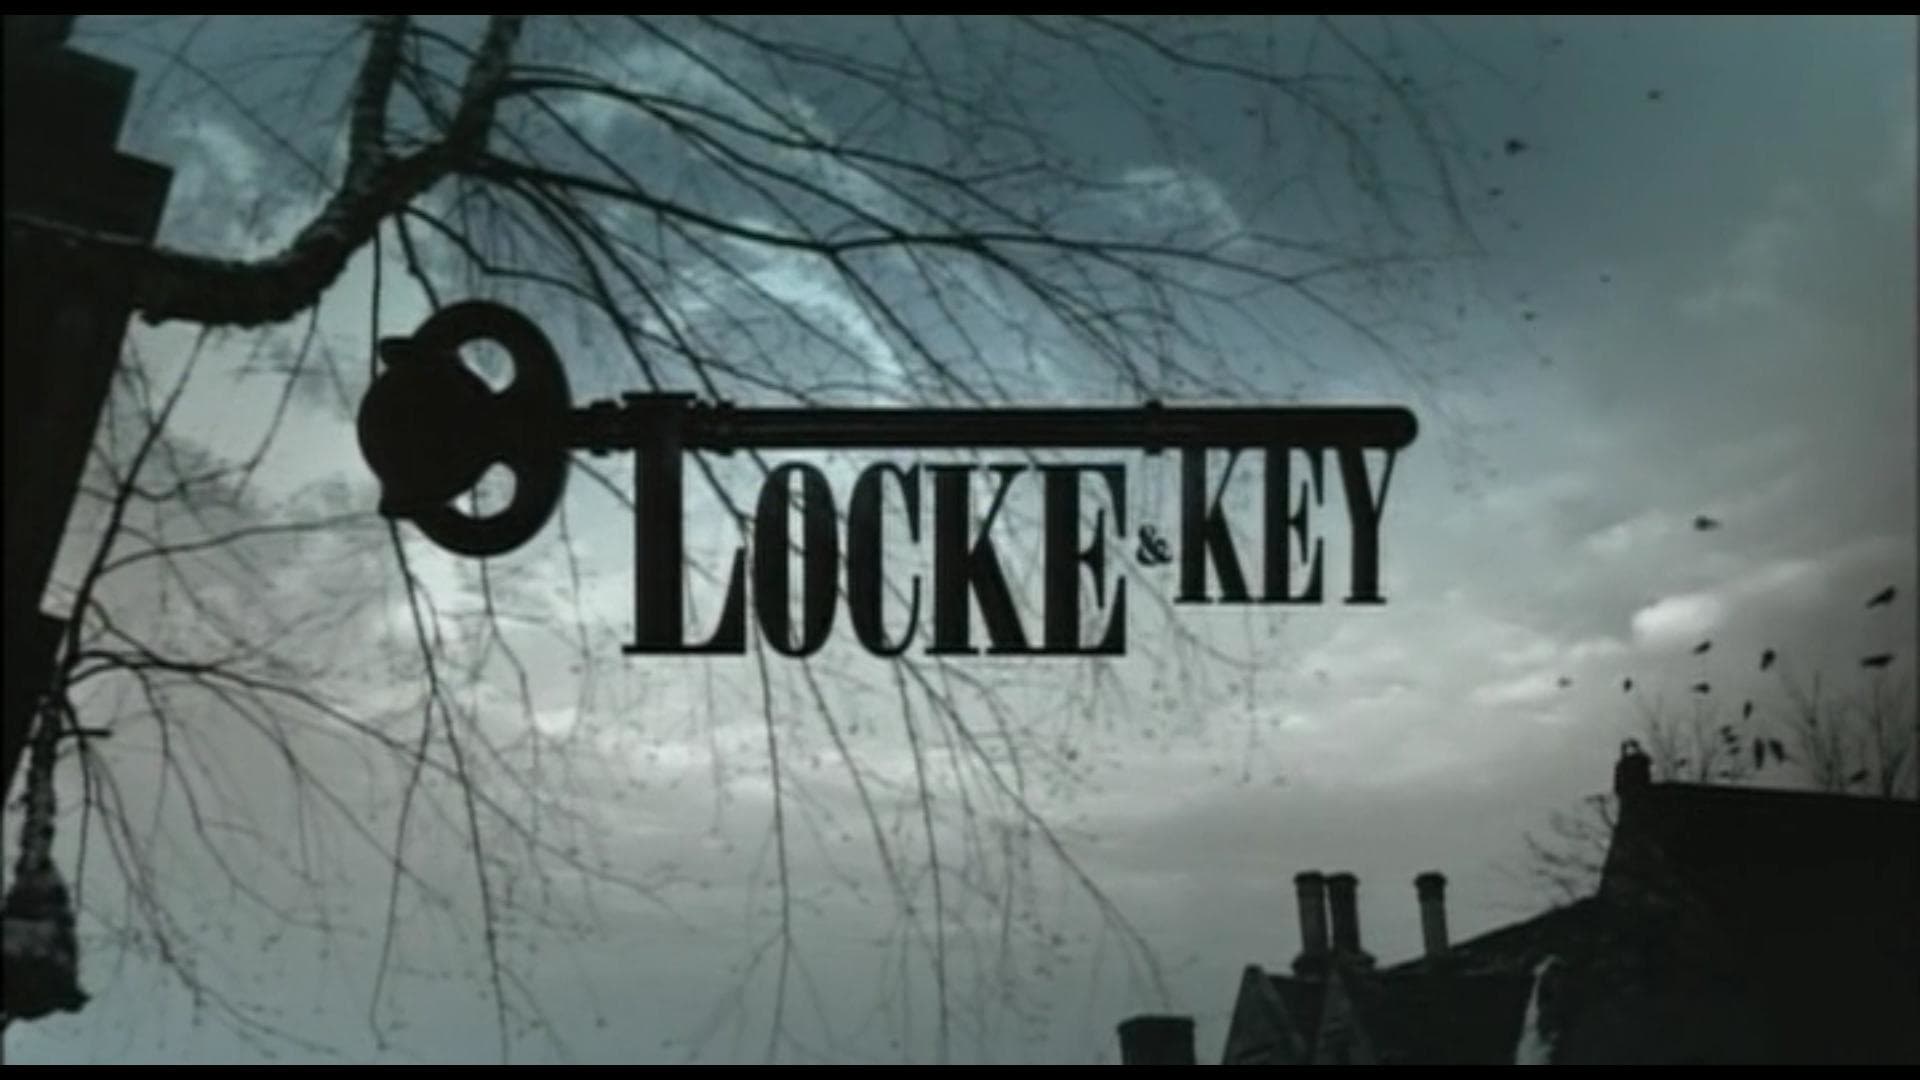 Locke And Key Wallpapers